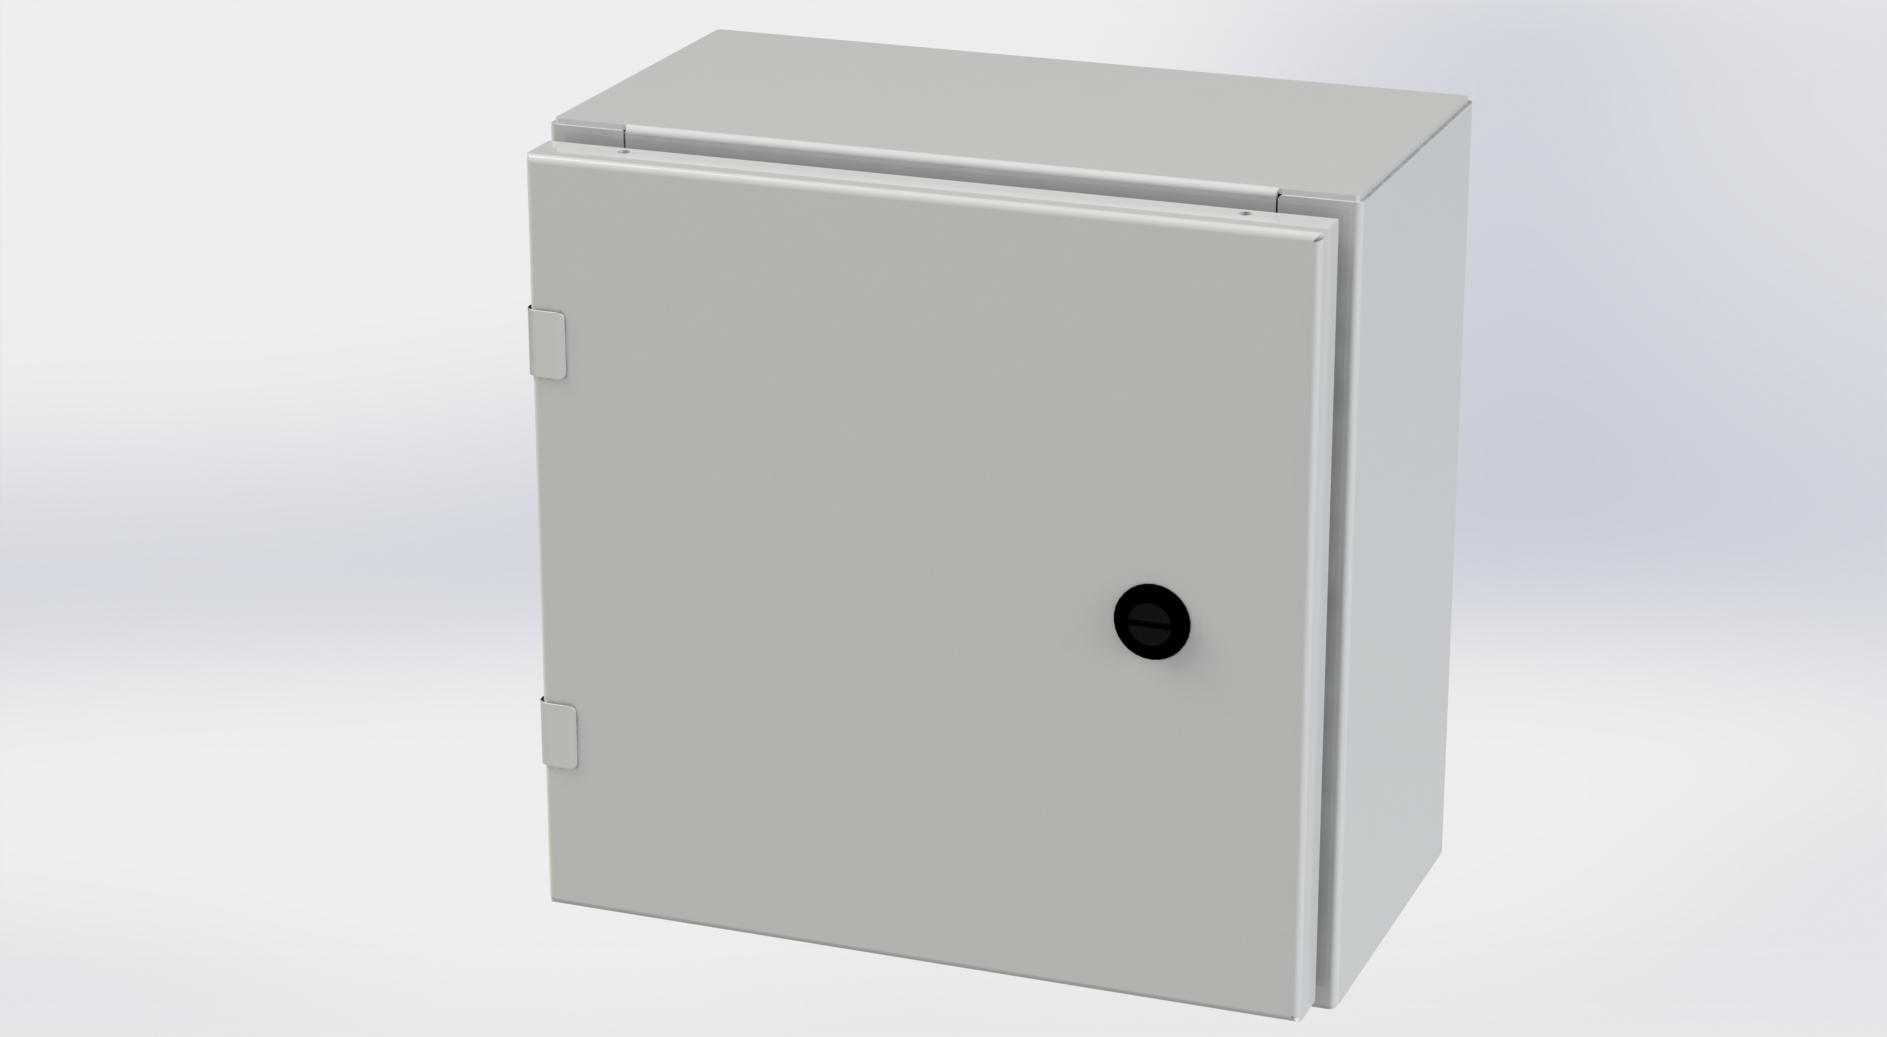 Saginaw Control SCE-12EL1206LPLG EL Enclosure, Height:12.00", Width:12.00", Depth:6.00", RAL 7035 gray powder coating inside and out. Optional sub-panels are powder coated white.